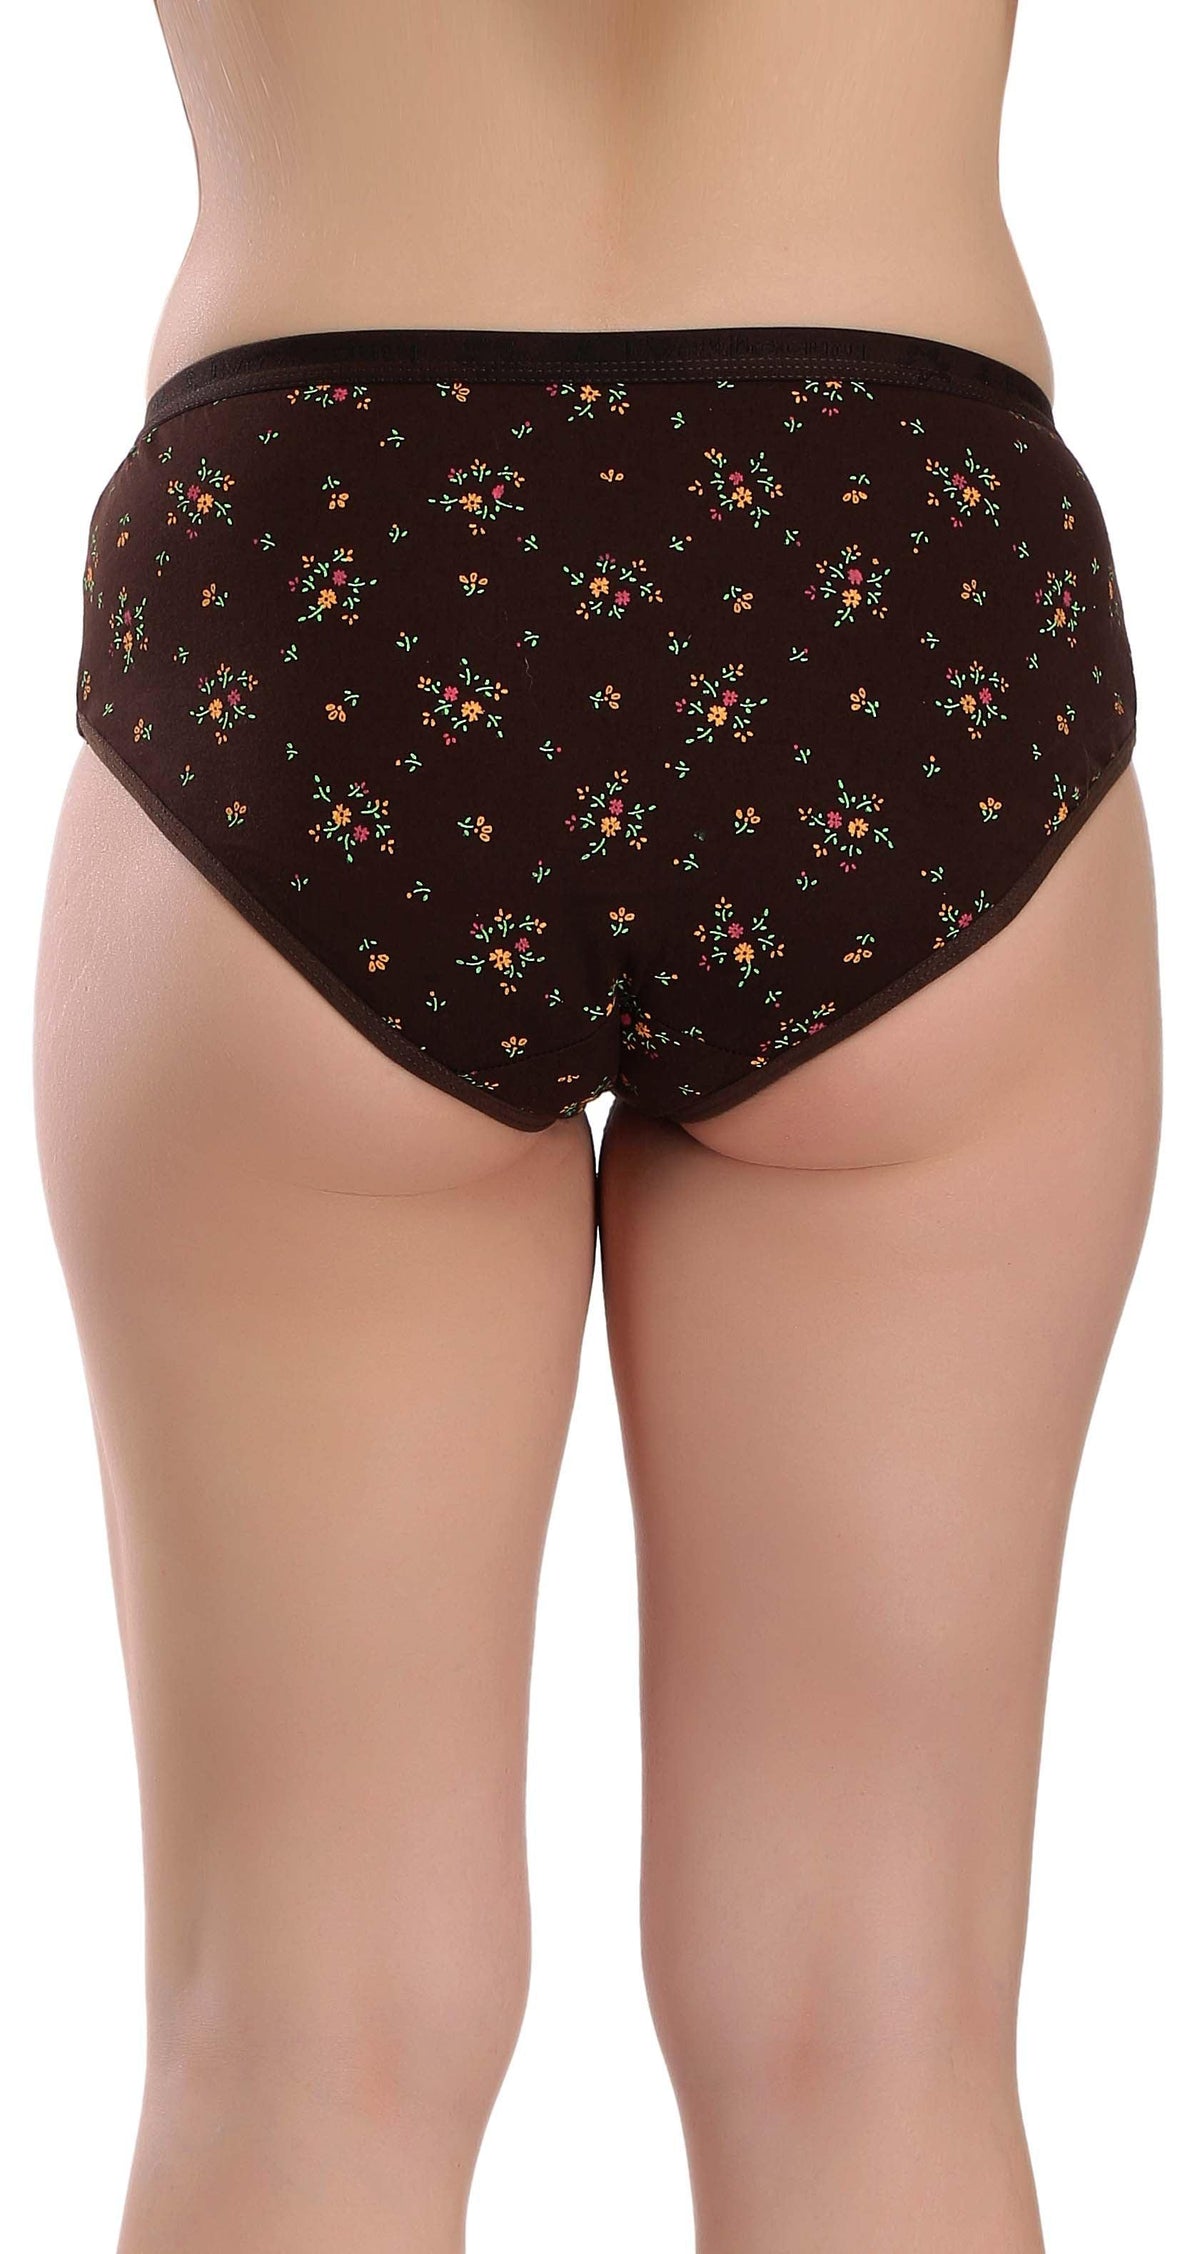 STUBY Panty Women Hipster Multicolor Briefs (Pack of 2)